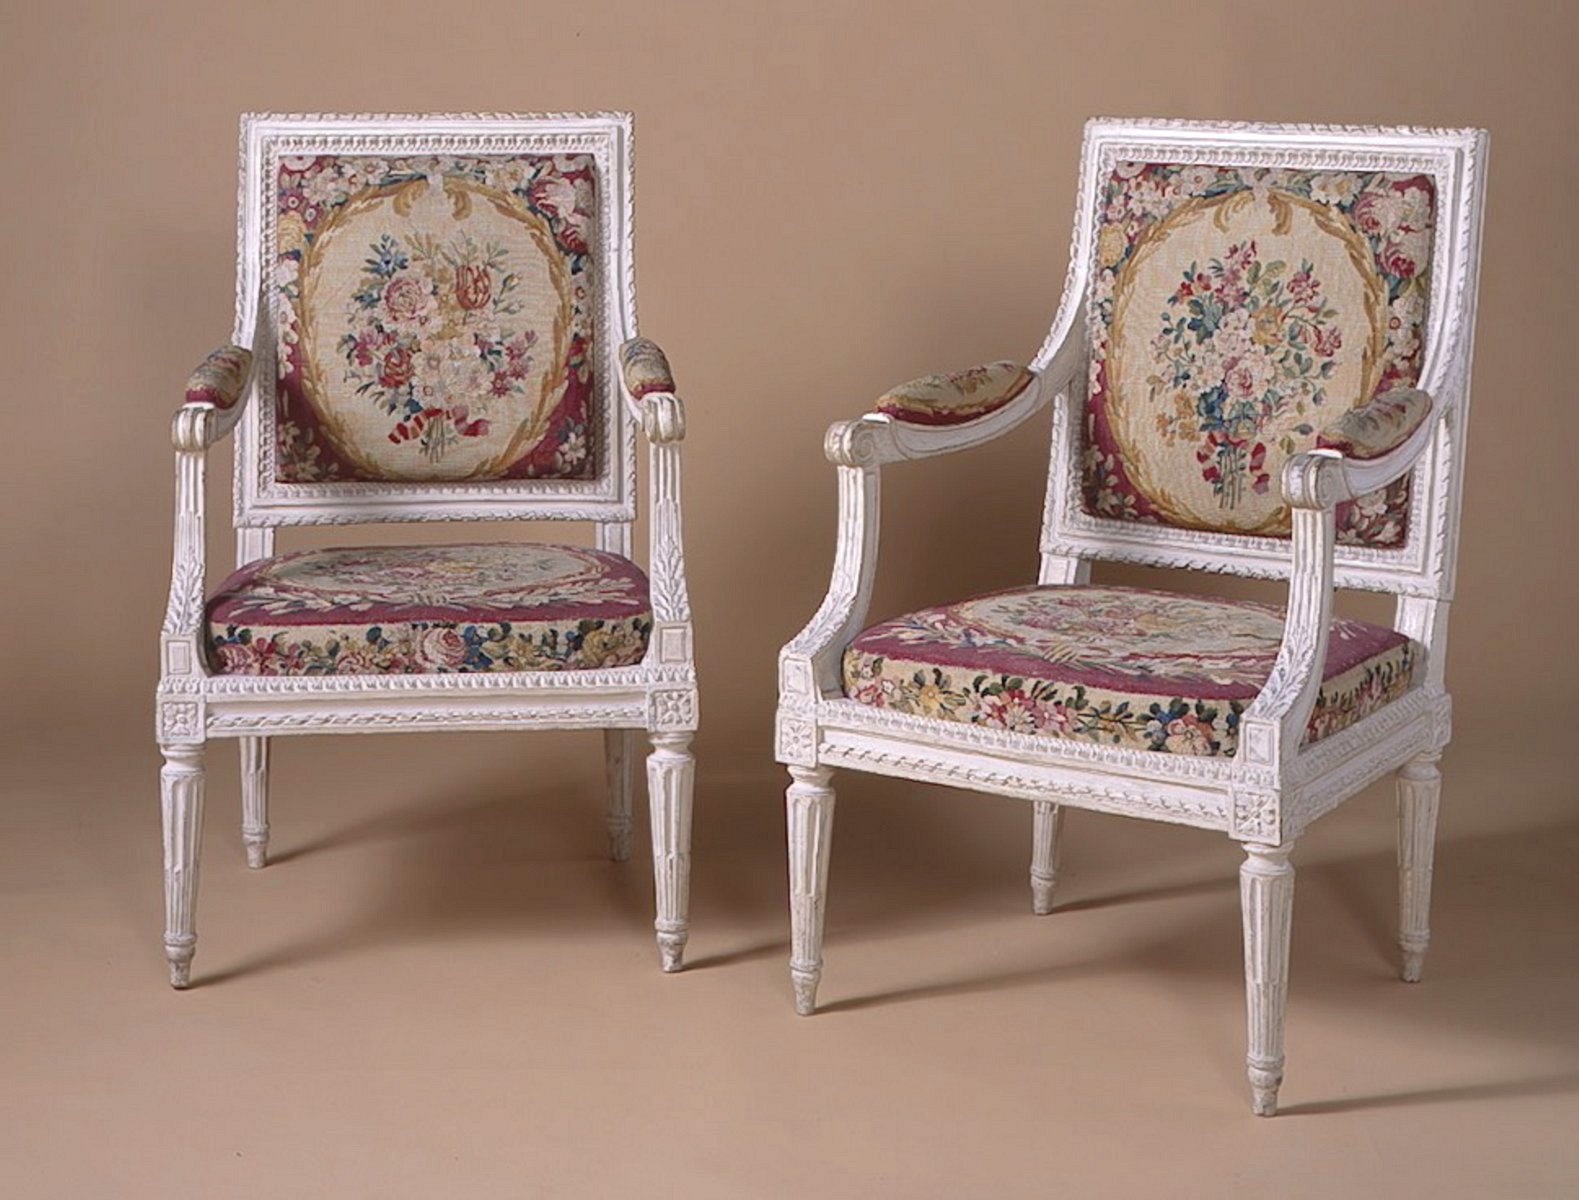 Pair of French Louis XVI Period, Grey-Painted Fauteuils Stamped by Jean-Baptiste Boulard